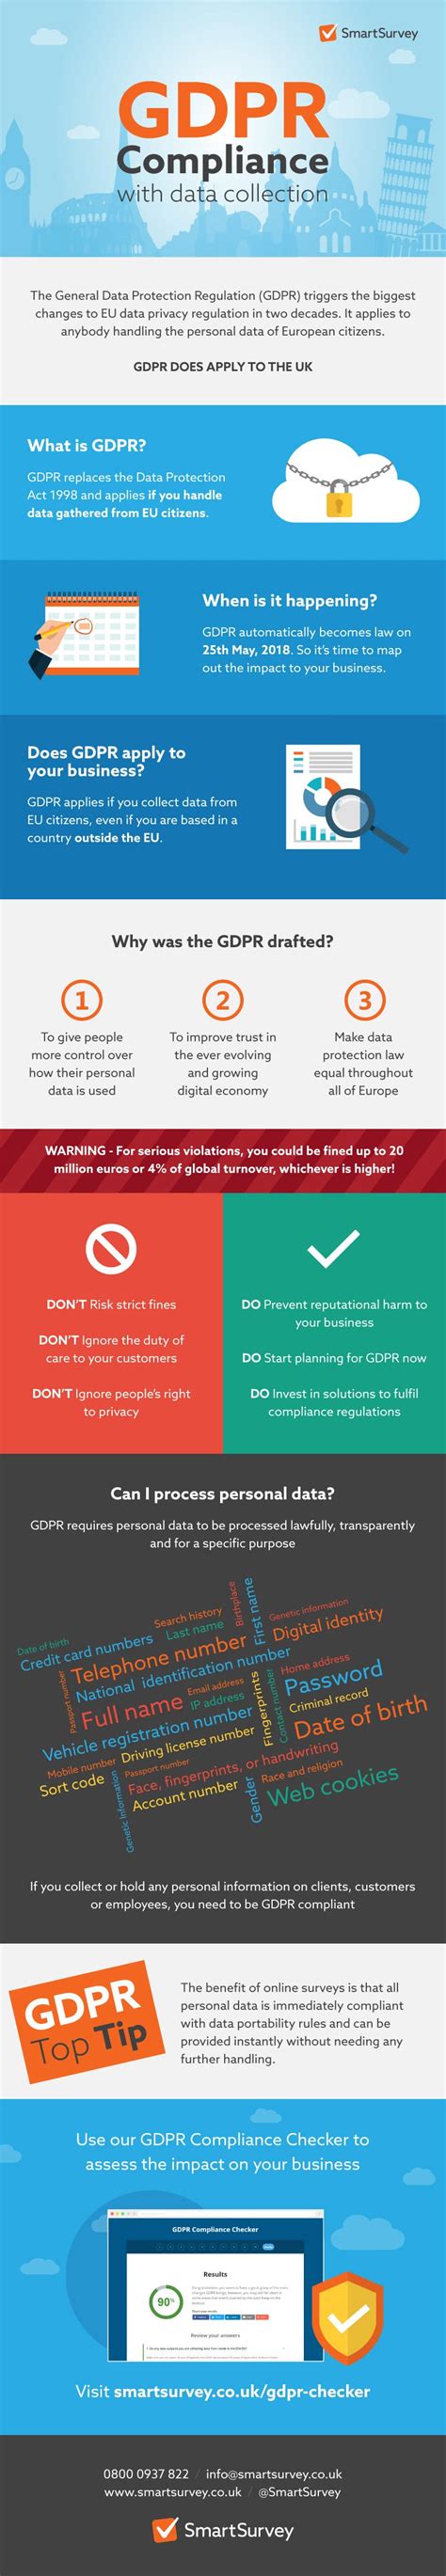 Gdpr Compliance What This Means For Data Collection Infographic Smart Insights